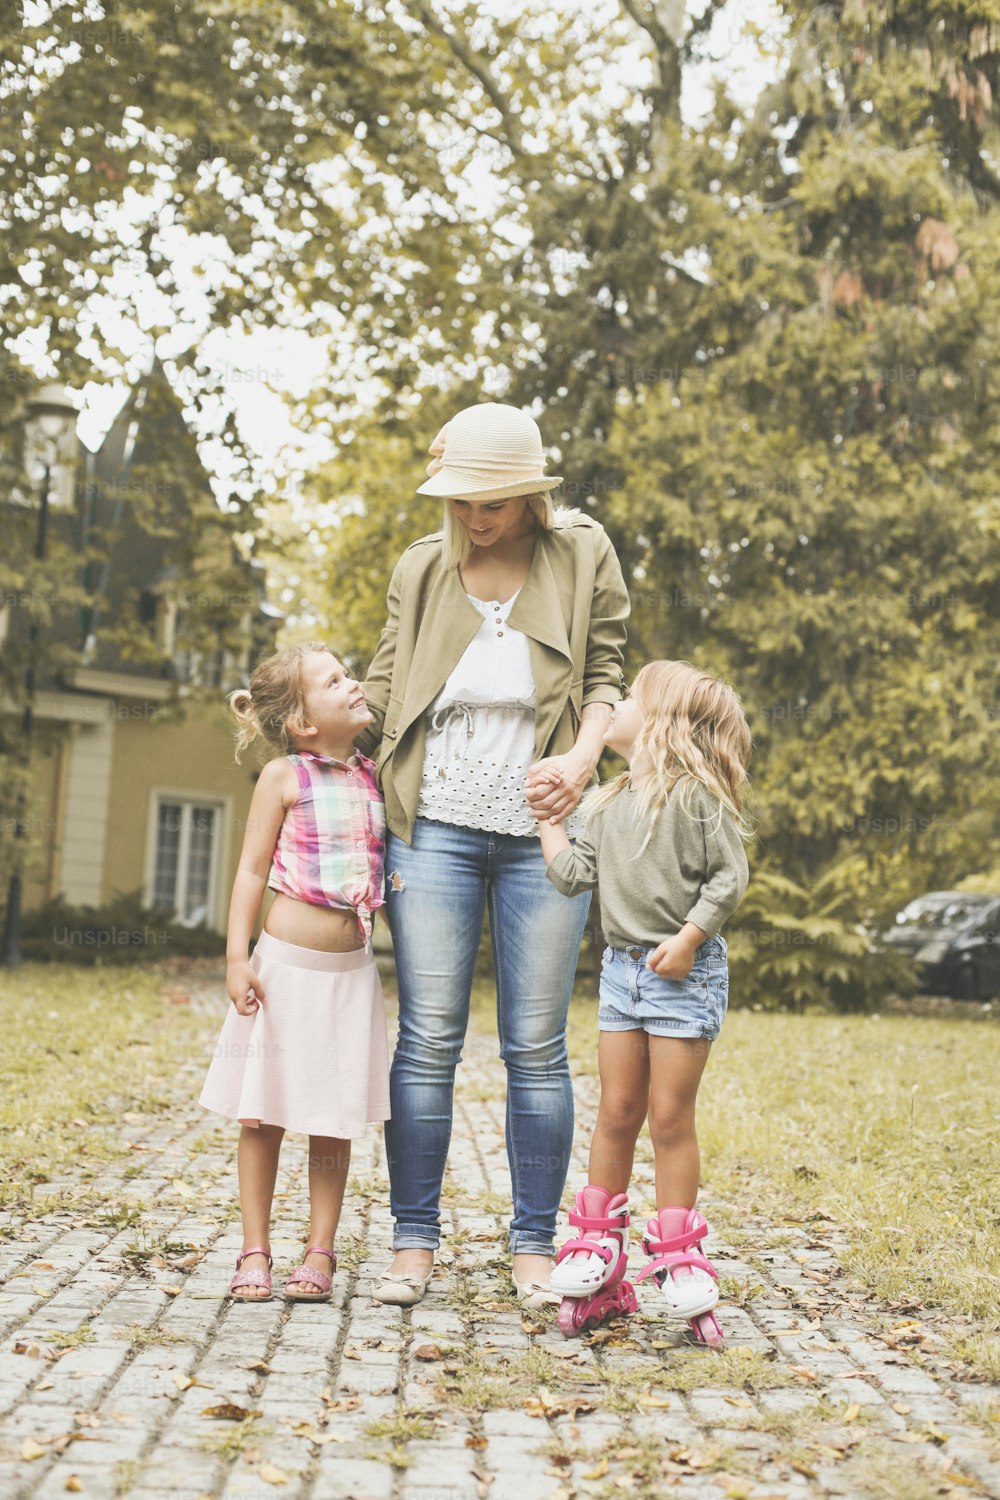 Cheerful mother walking and talk with her daughters.